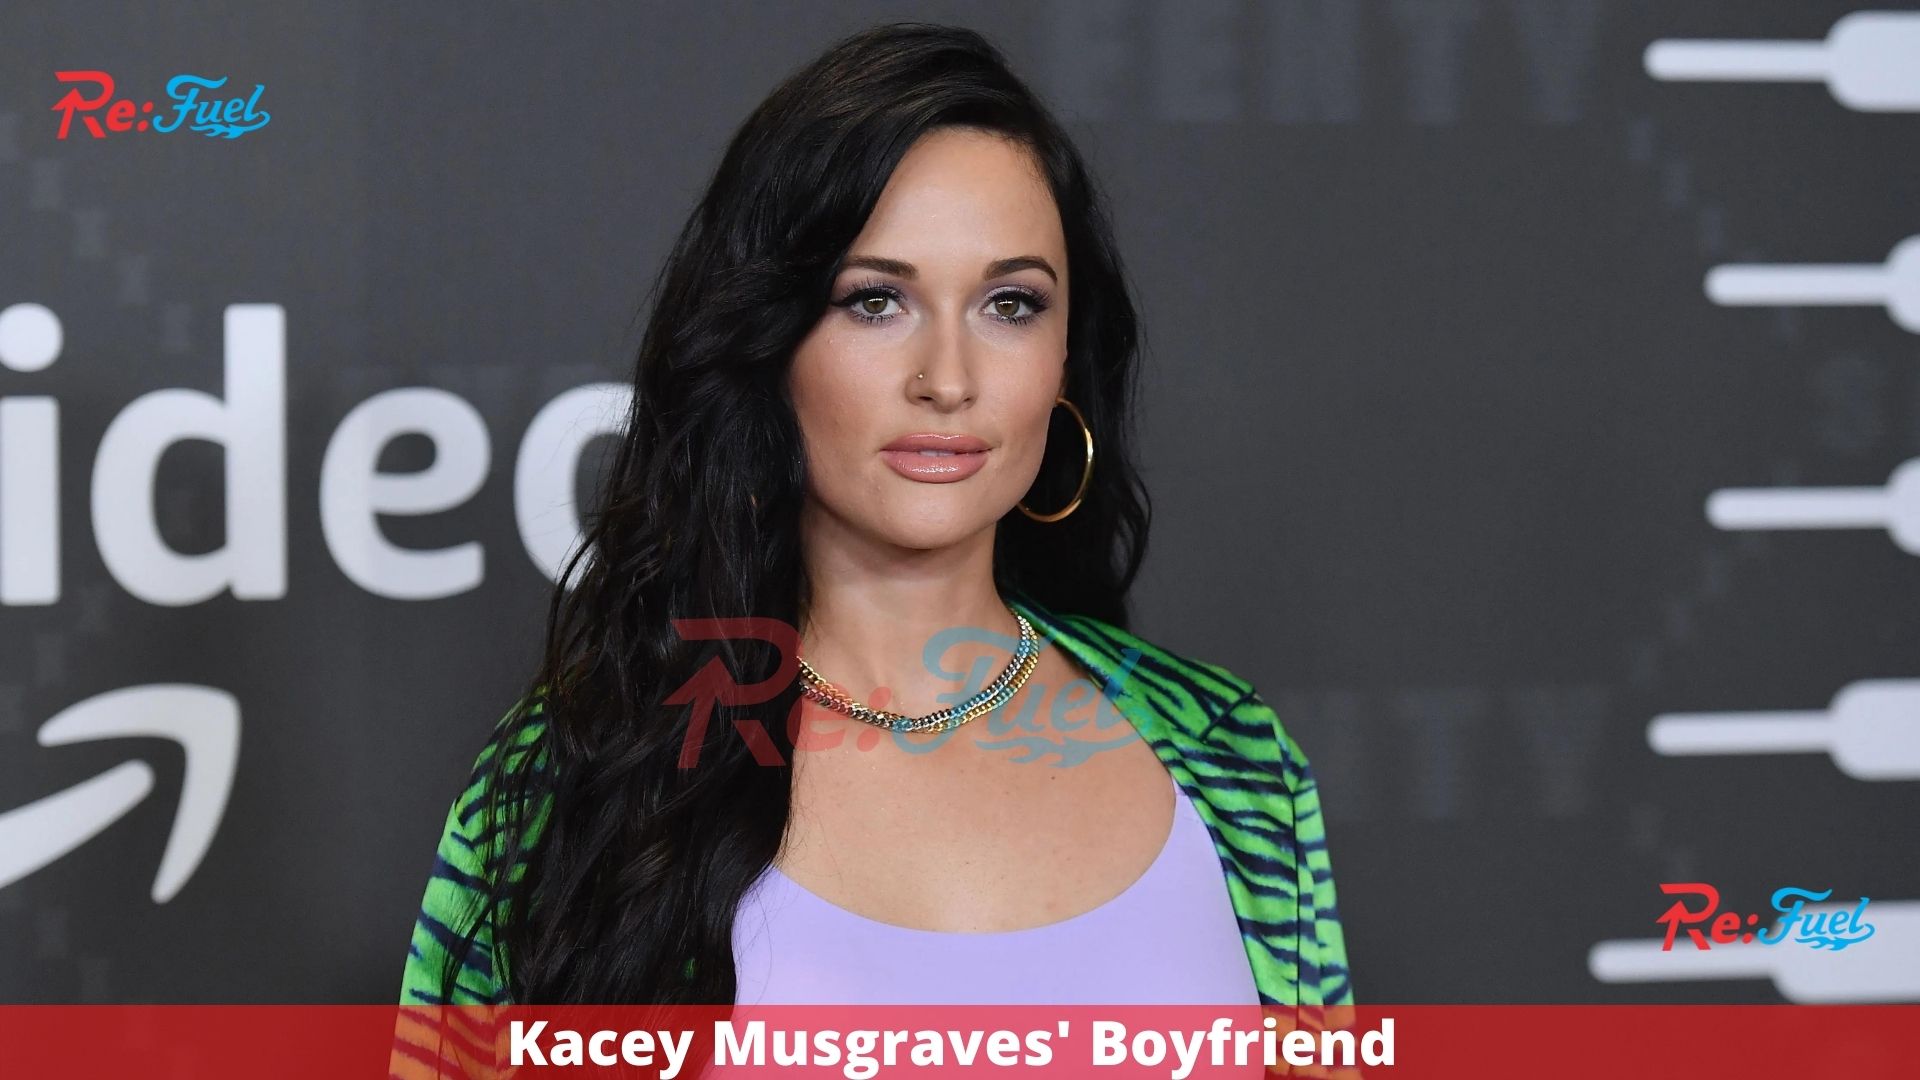 Who Is Kacey Musgraves’ Boyfriend? Complete Relationship Timeline